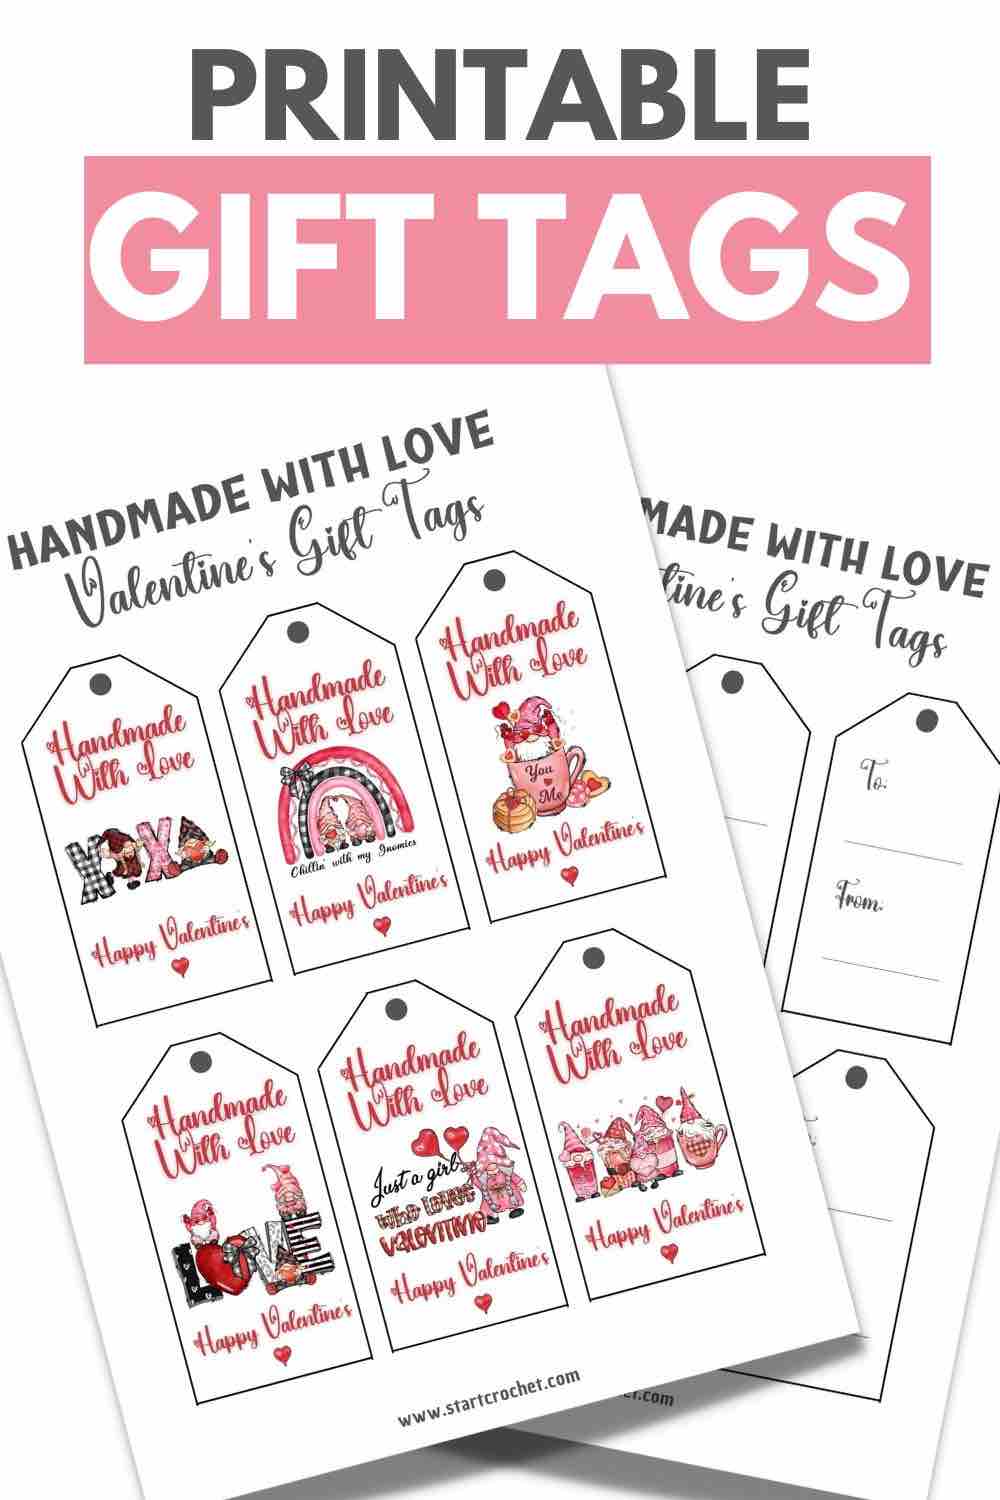 Valentine's Gift Tags Printable (Handmade With Love) - 5